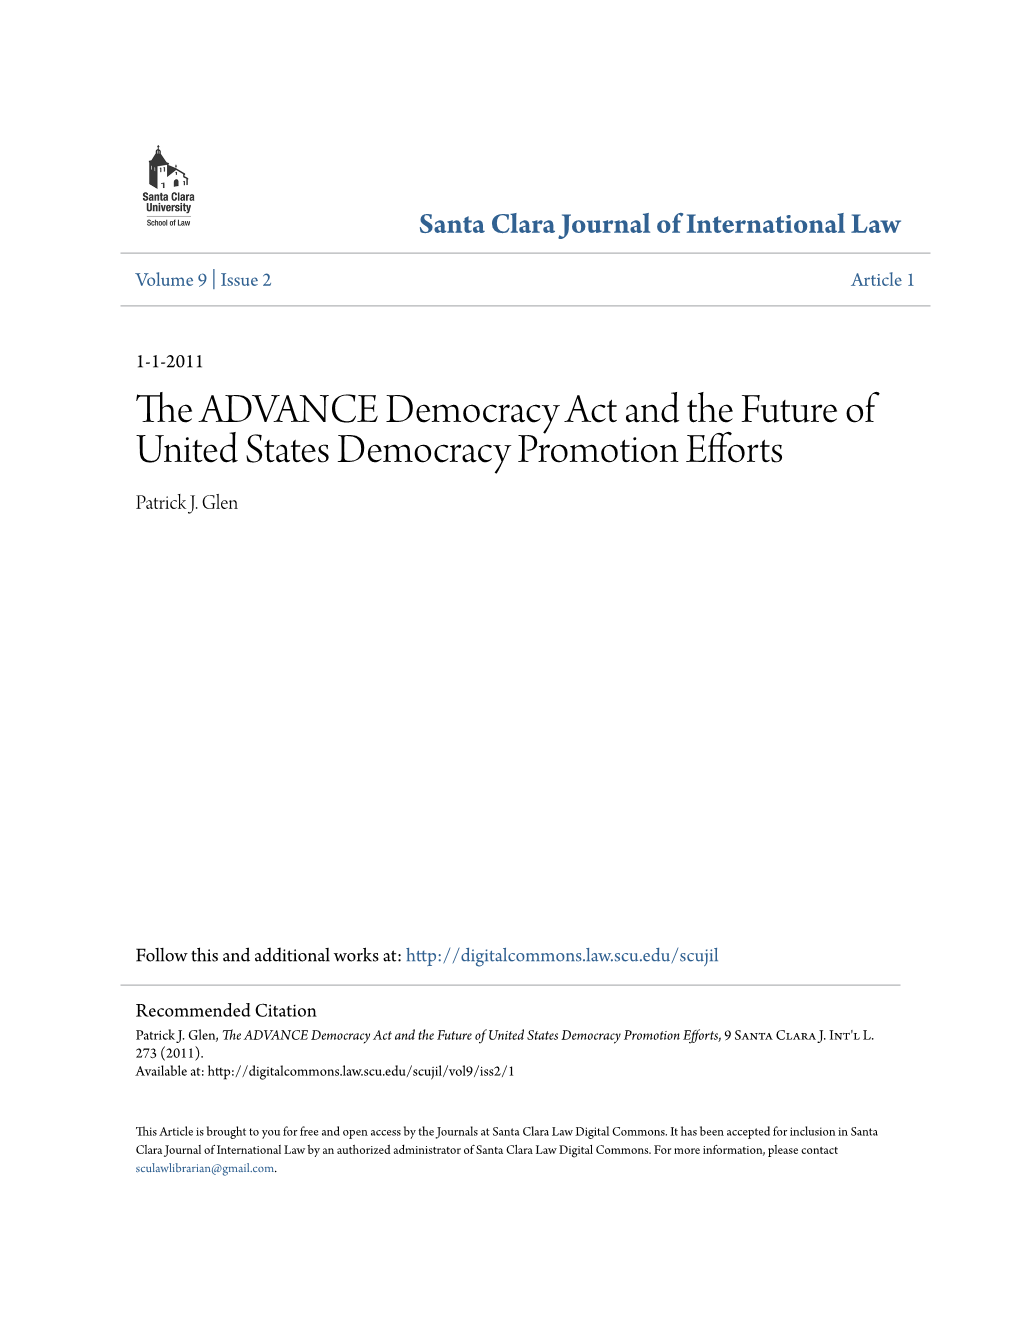 The ADVANCE Democracy Act and the Future of United States Democracy Promotion Efforts Patrick J